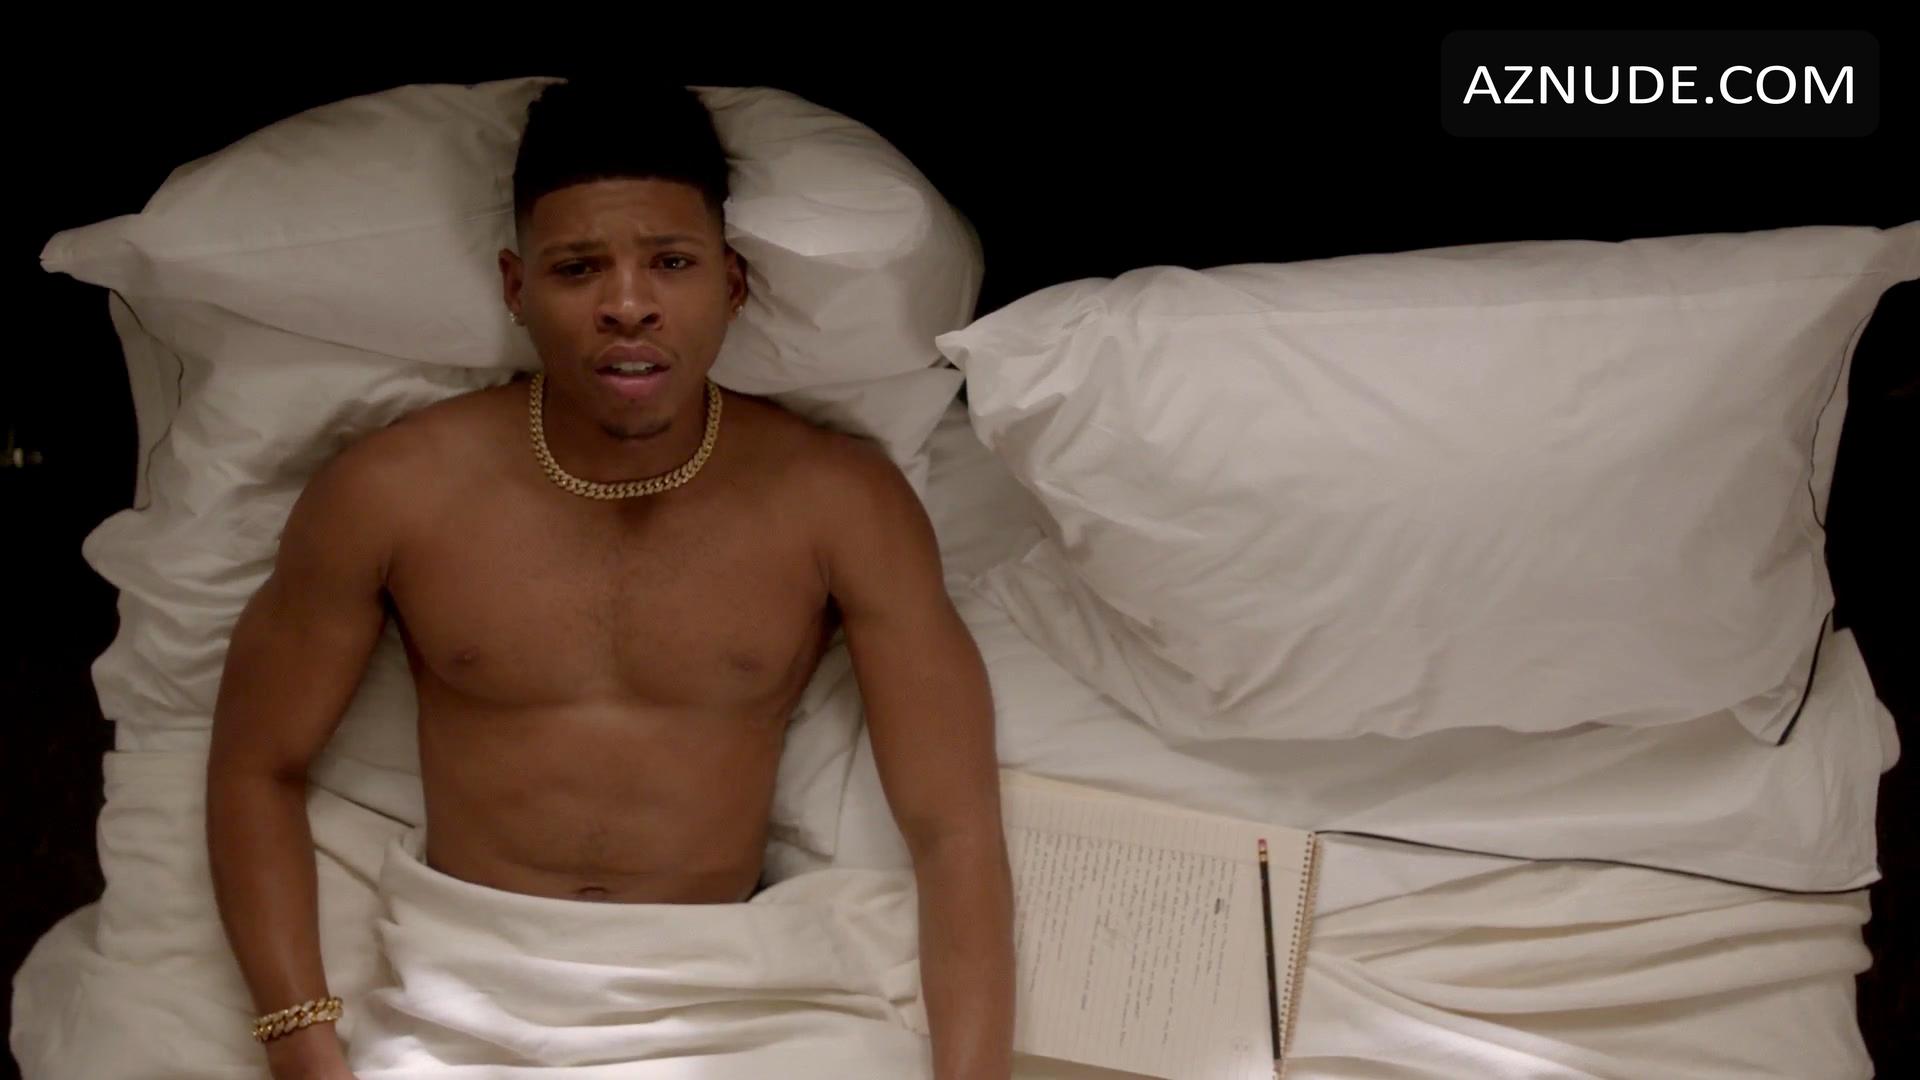 chad l share bryshere gray dick pic photos